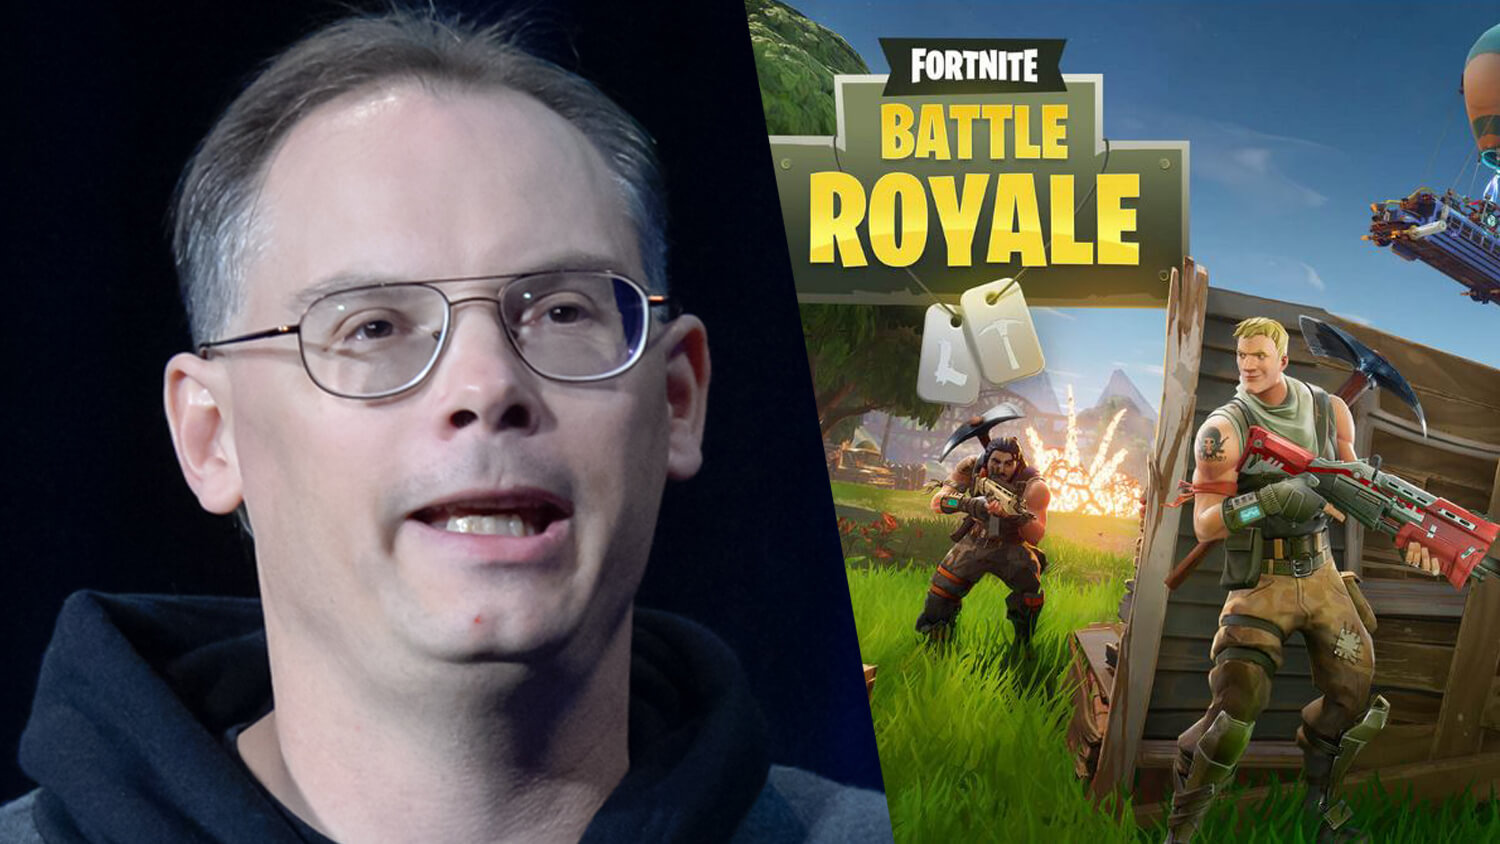 Fortnite's Founder Saved a Forest From Destruction for 15 Million